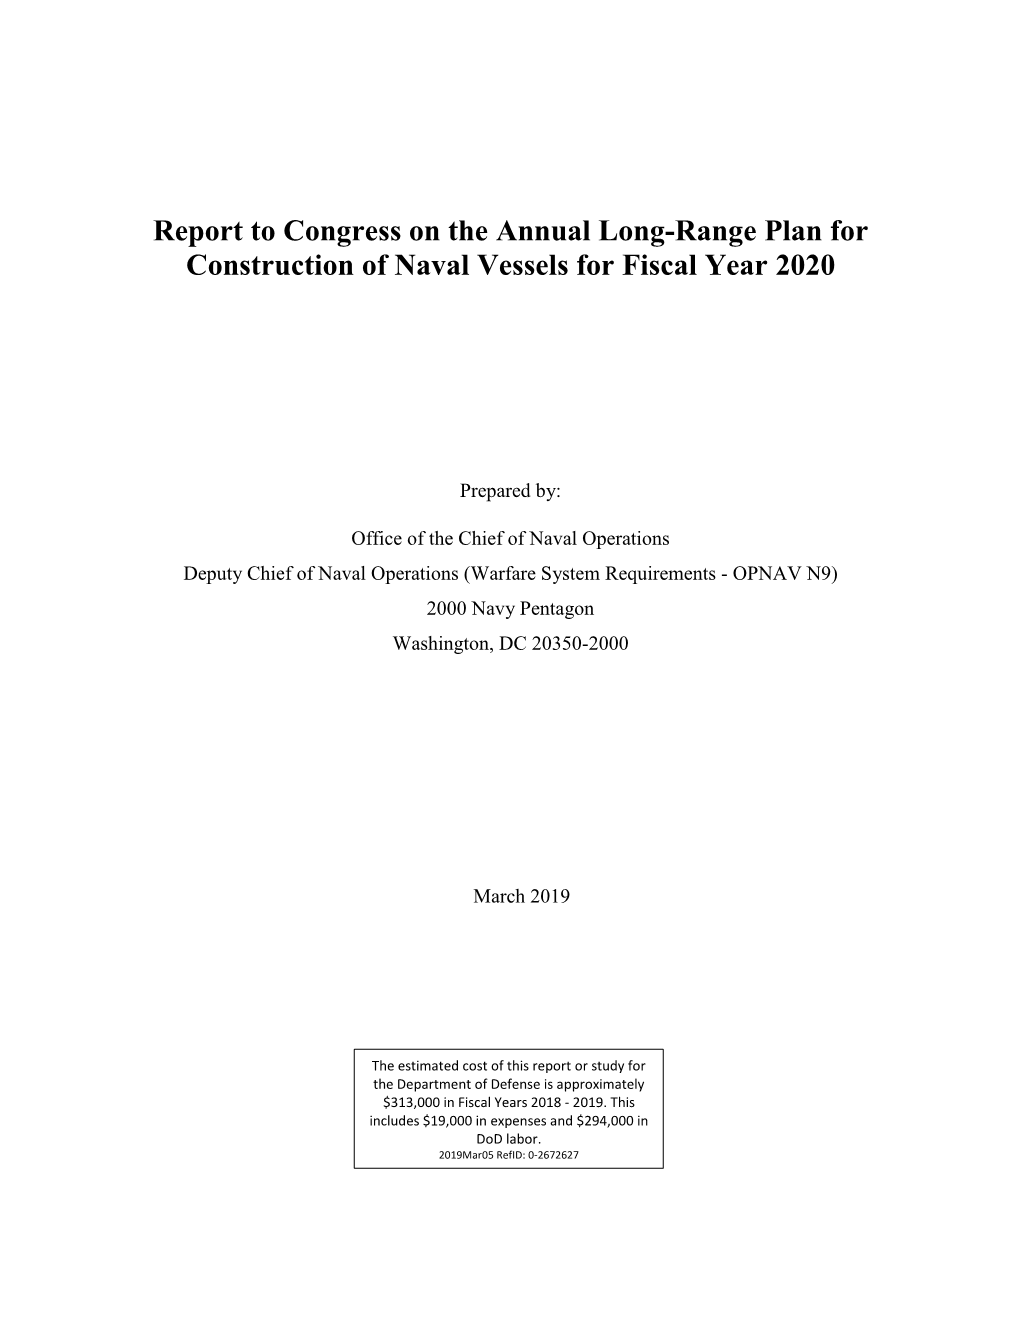 Report to Congress on the Annual Long-Range Plan for Construction of Naval Vessels for Fiscal Year 2020